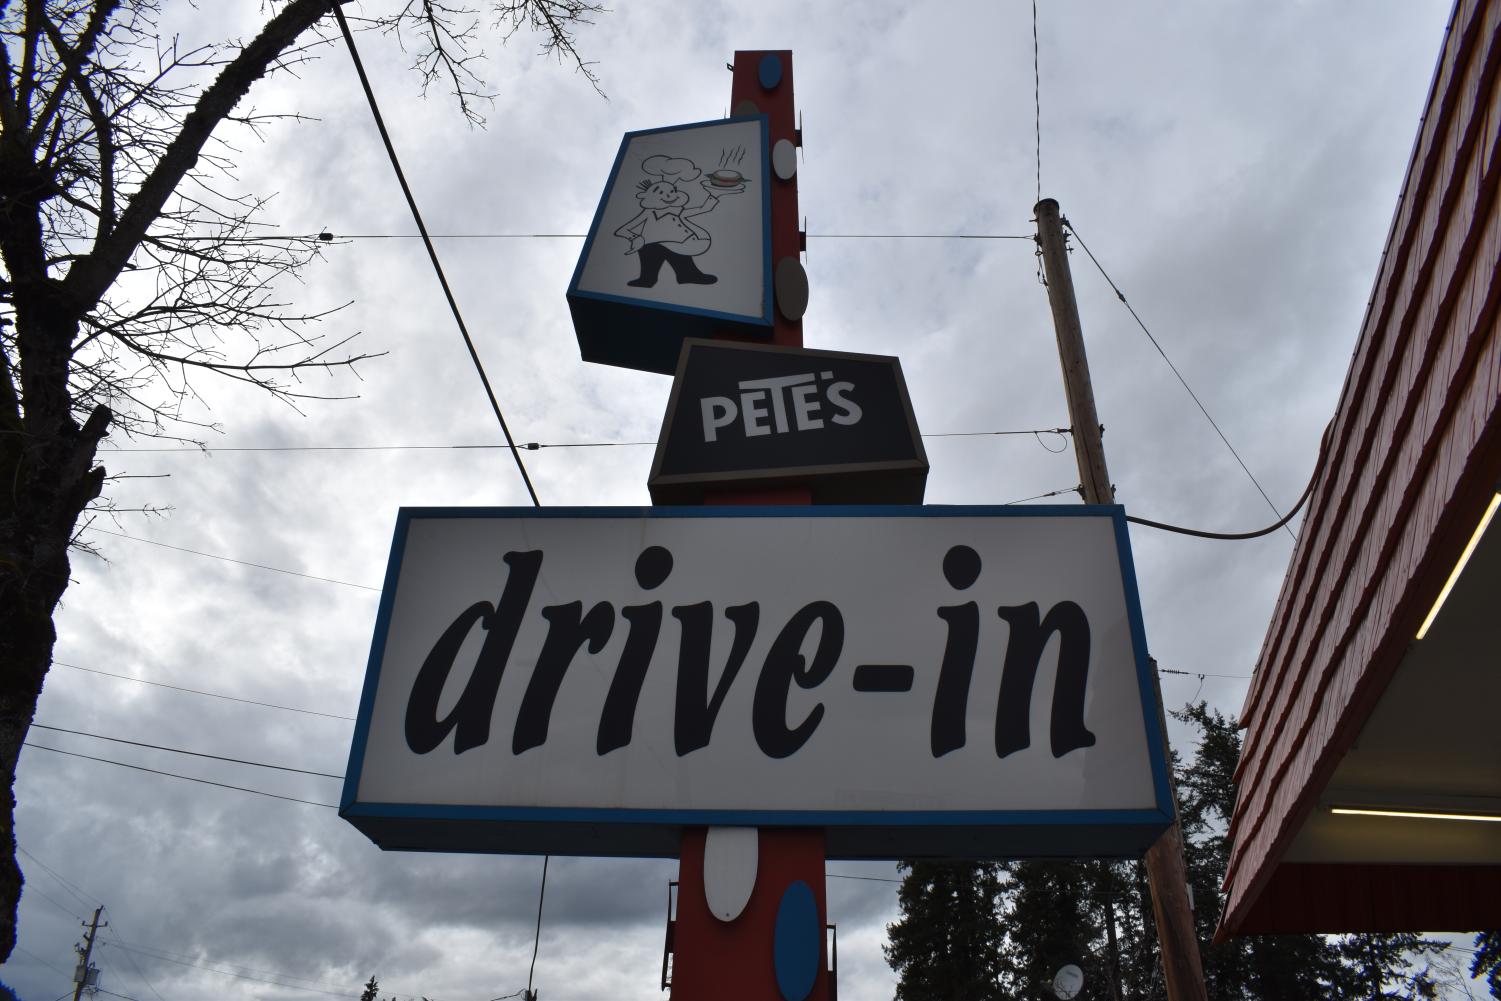 In+a+car+or+on+foot%2C+Petes+Drive-In+is+worth+a+visit